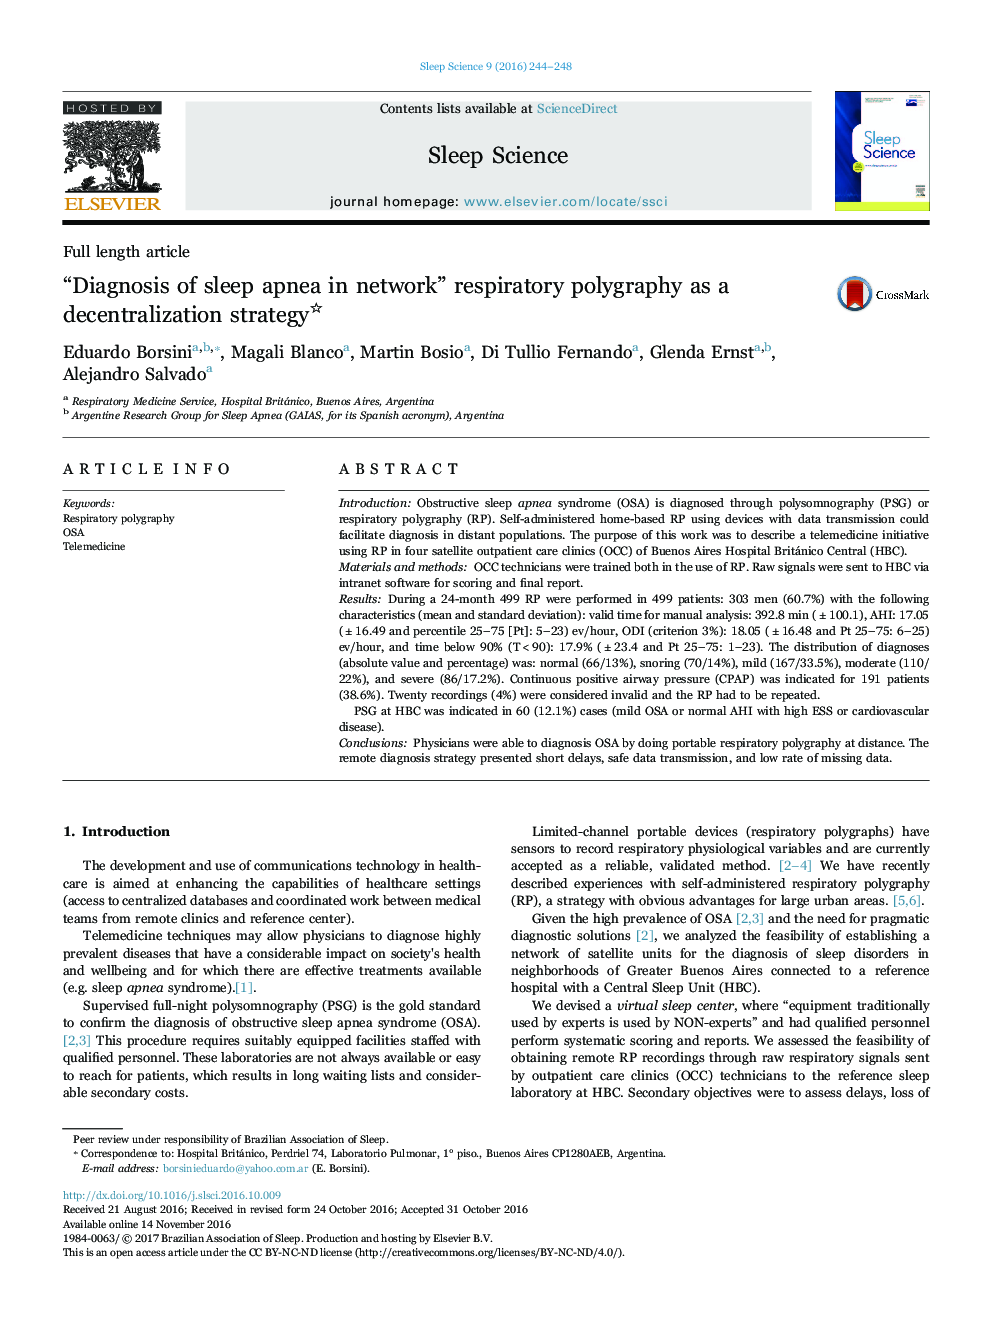 Full length article“Diagnosis of sleep apnea in network” respiratory polygraphy as a decentralization strategy